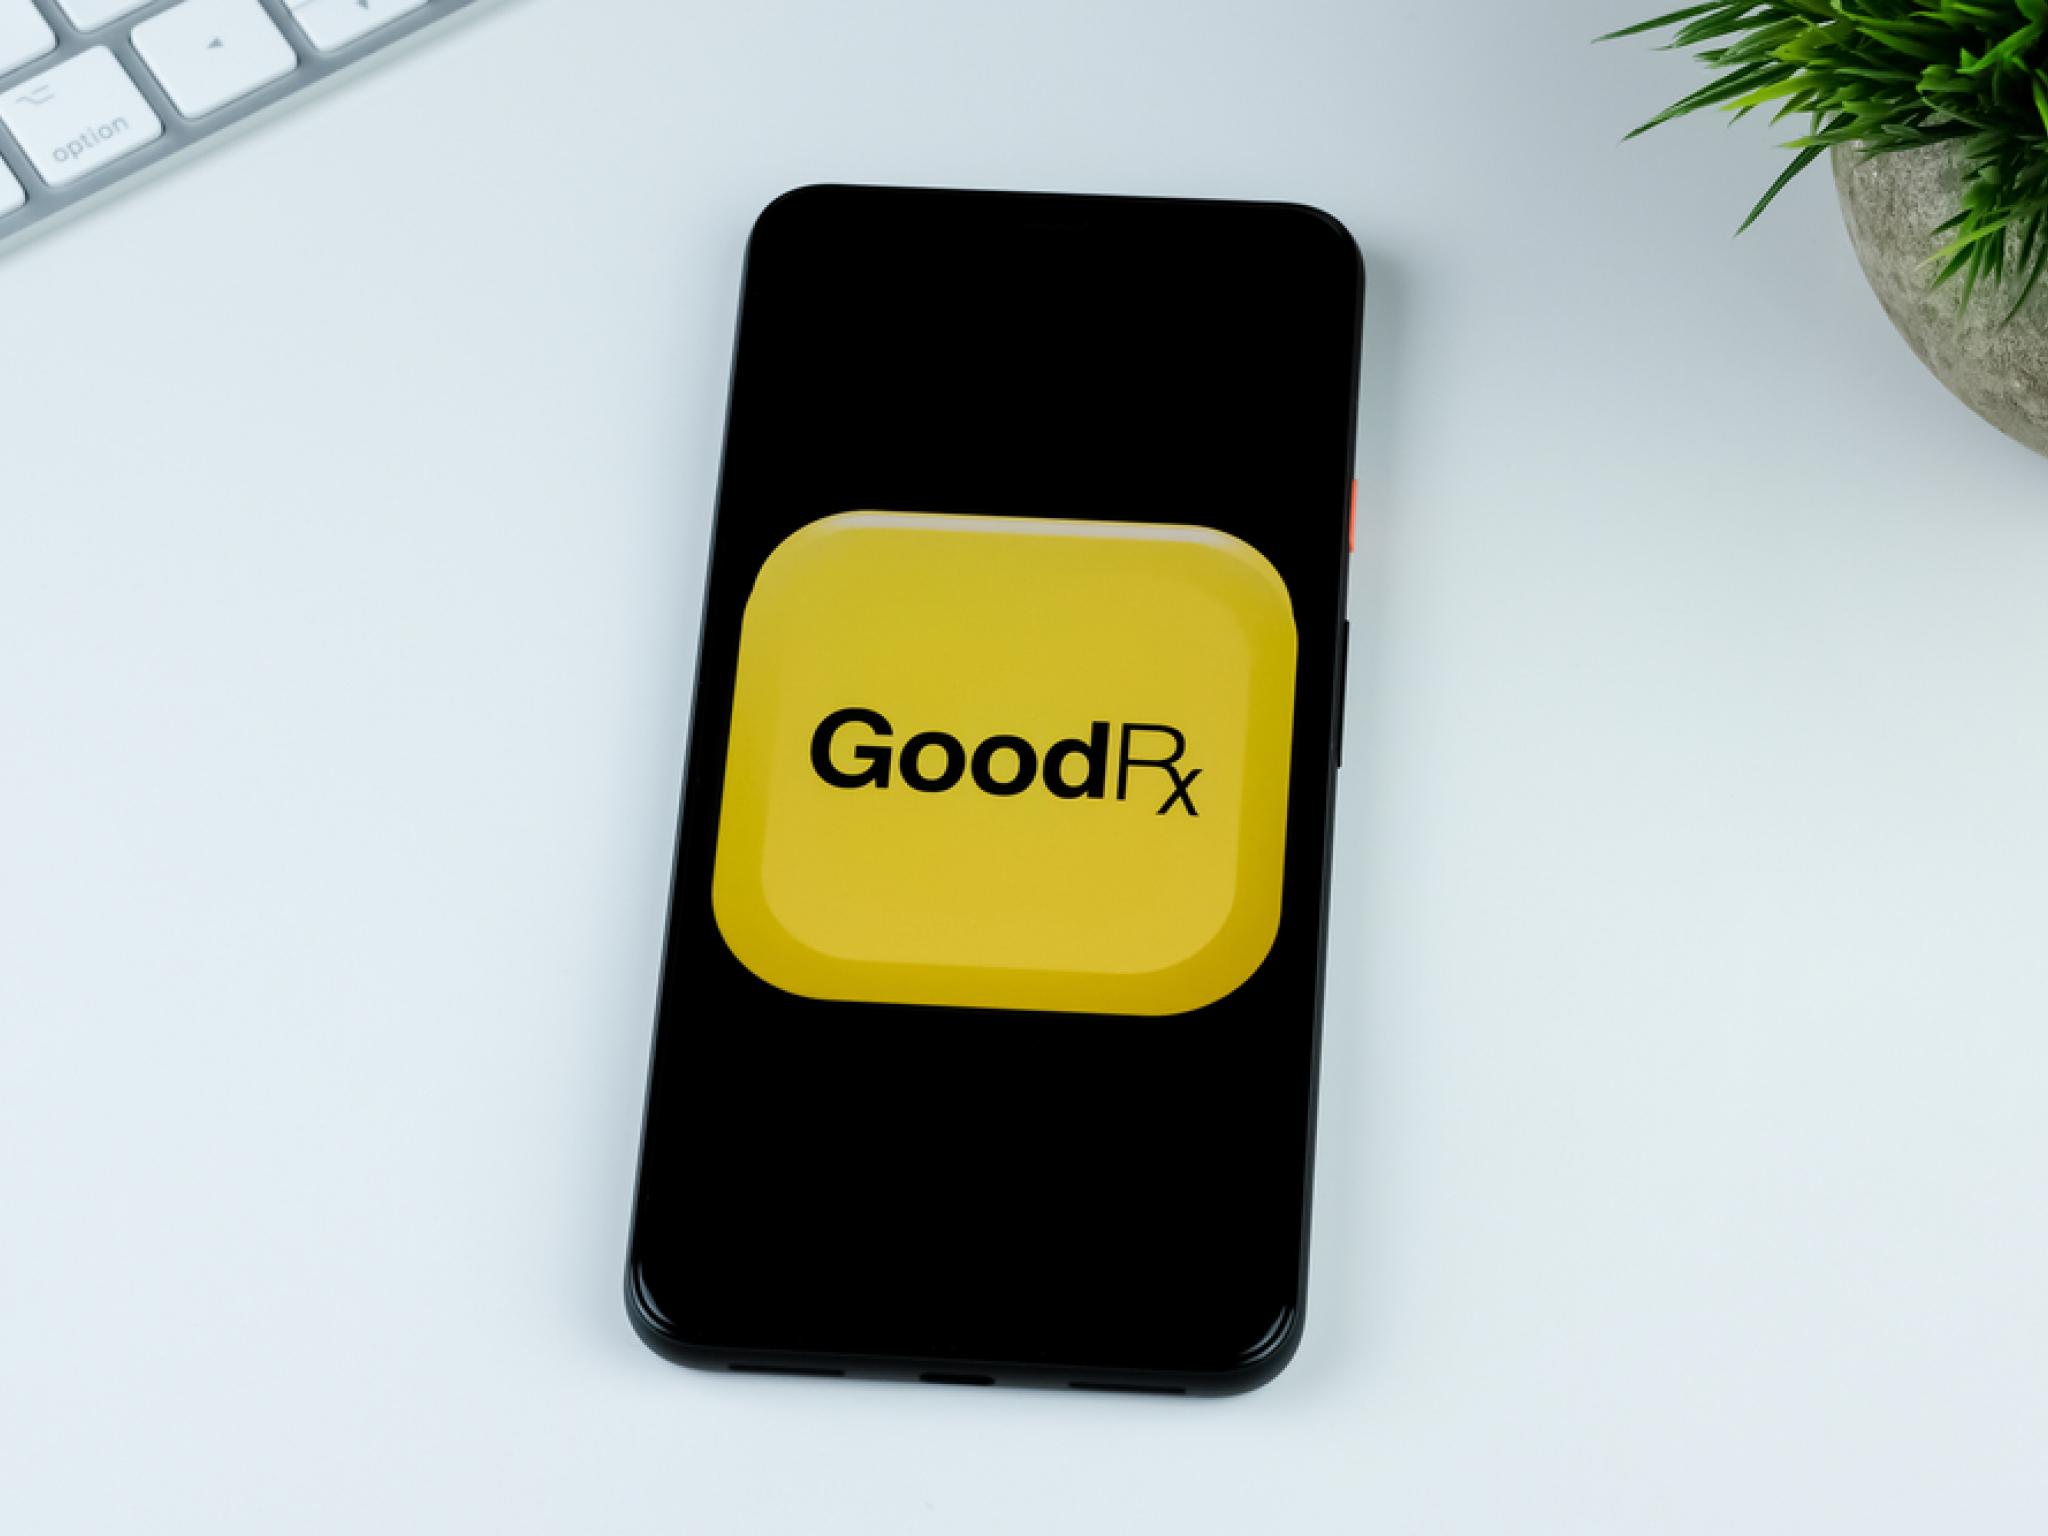  goodrx-strengthens-core-business-with-new-initiatives-analyst-upgrades-on-potential-opportunities 